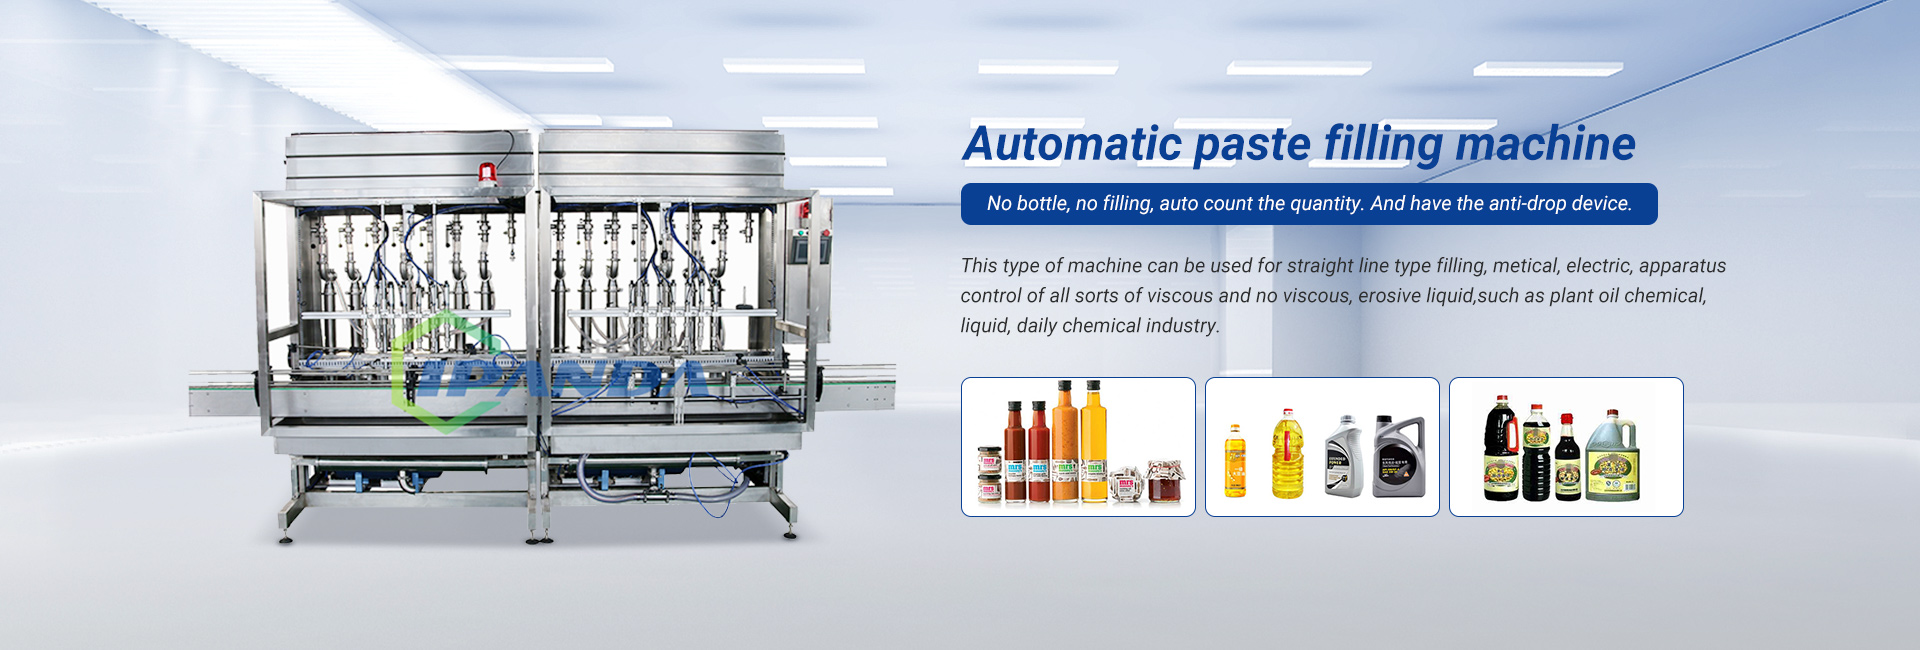 Washing Filling Capping 3 In 1 Filling Machine